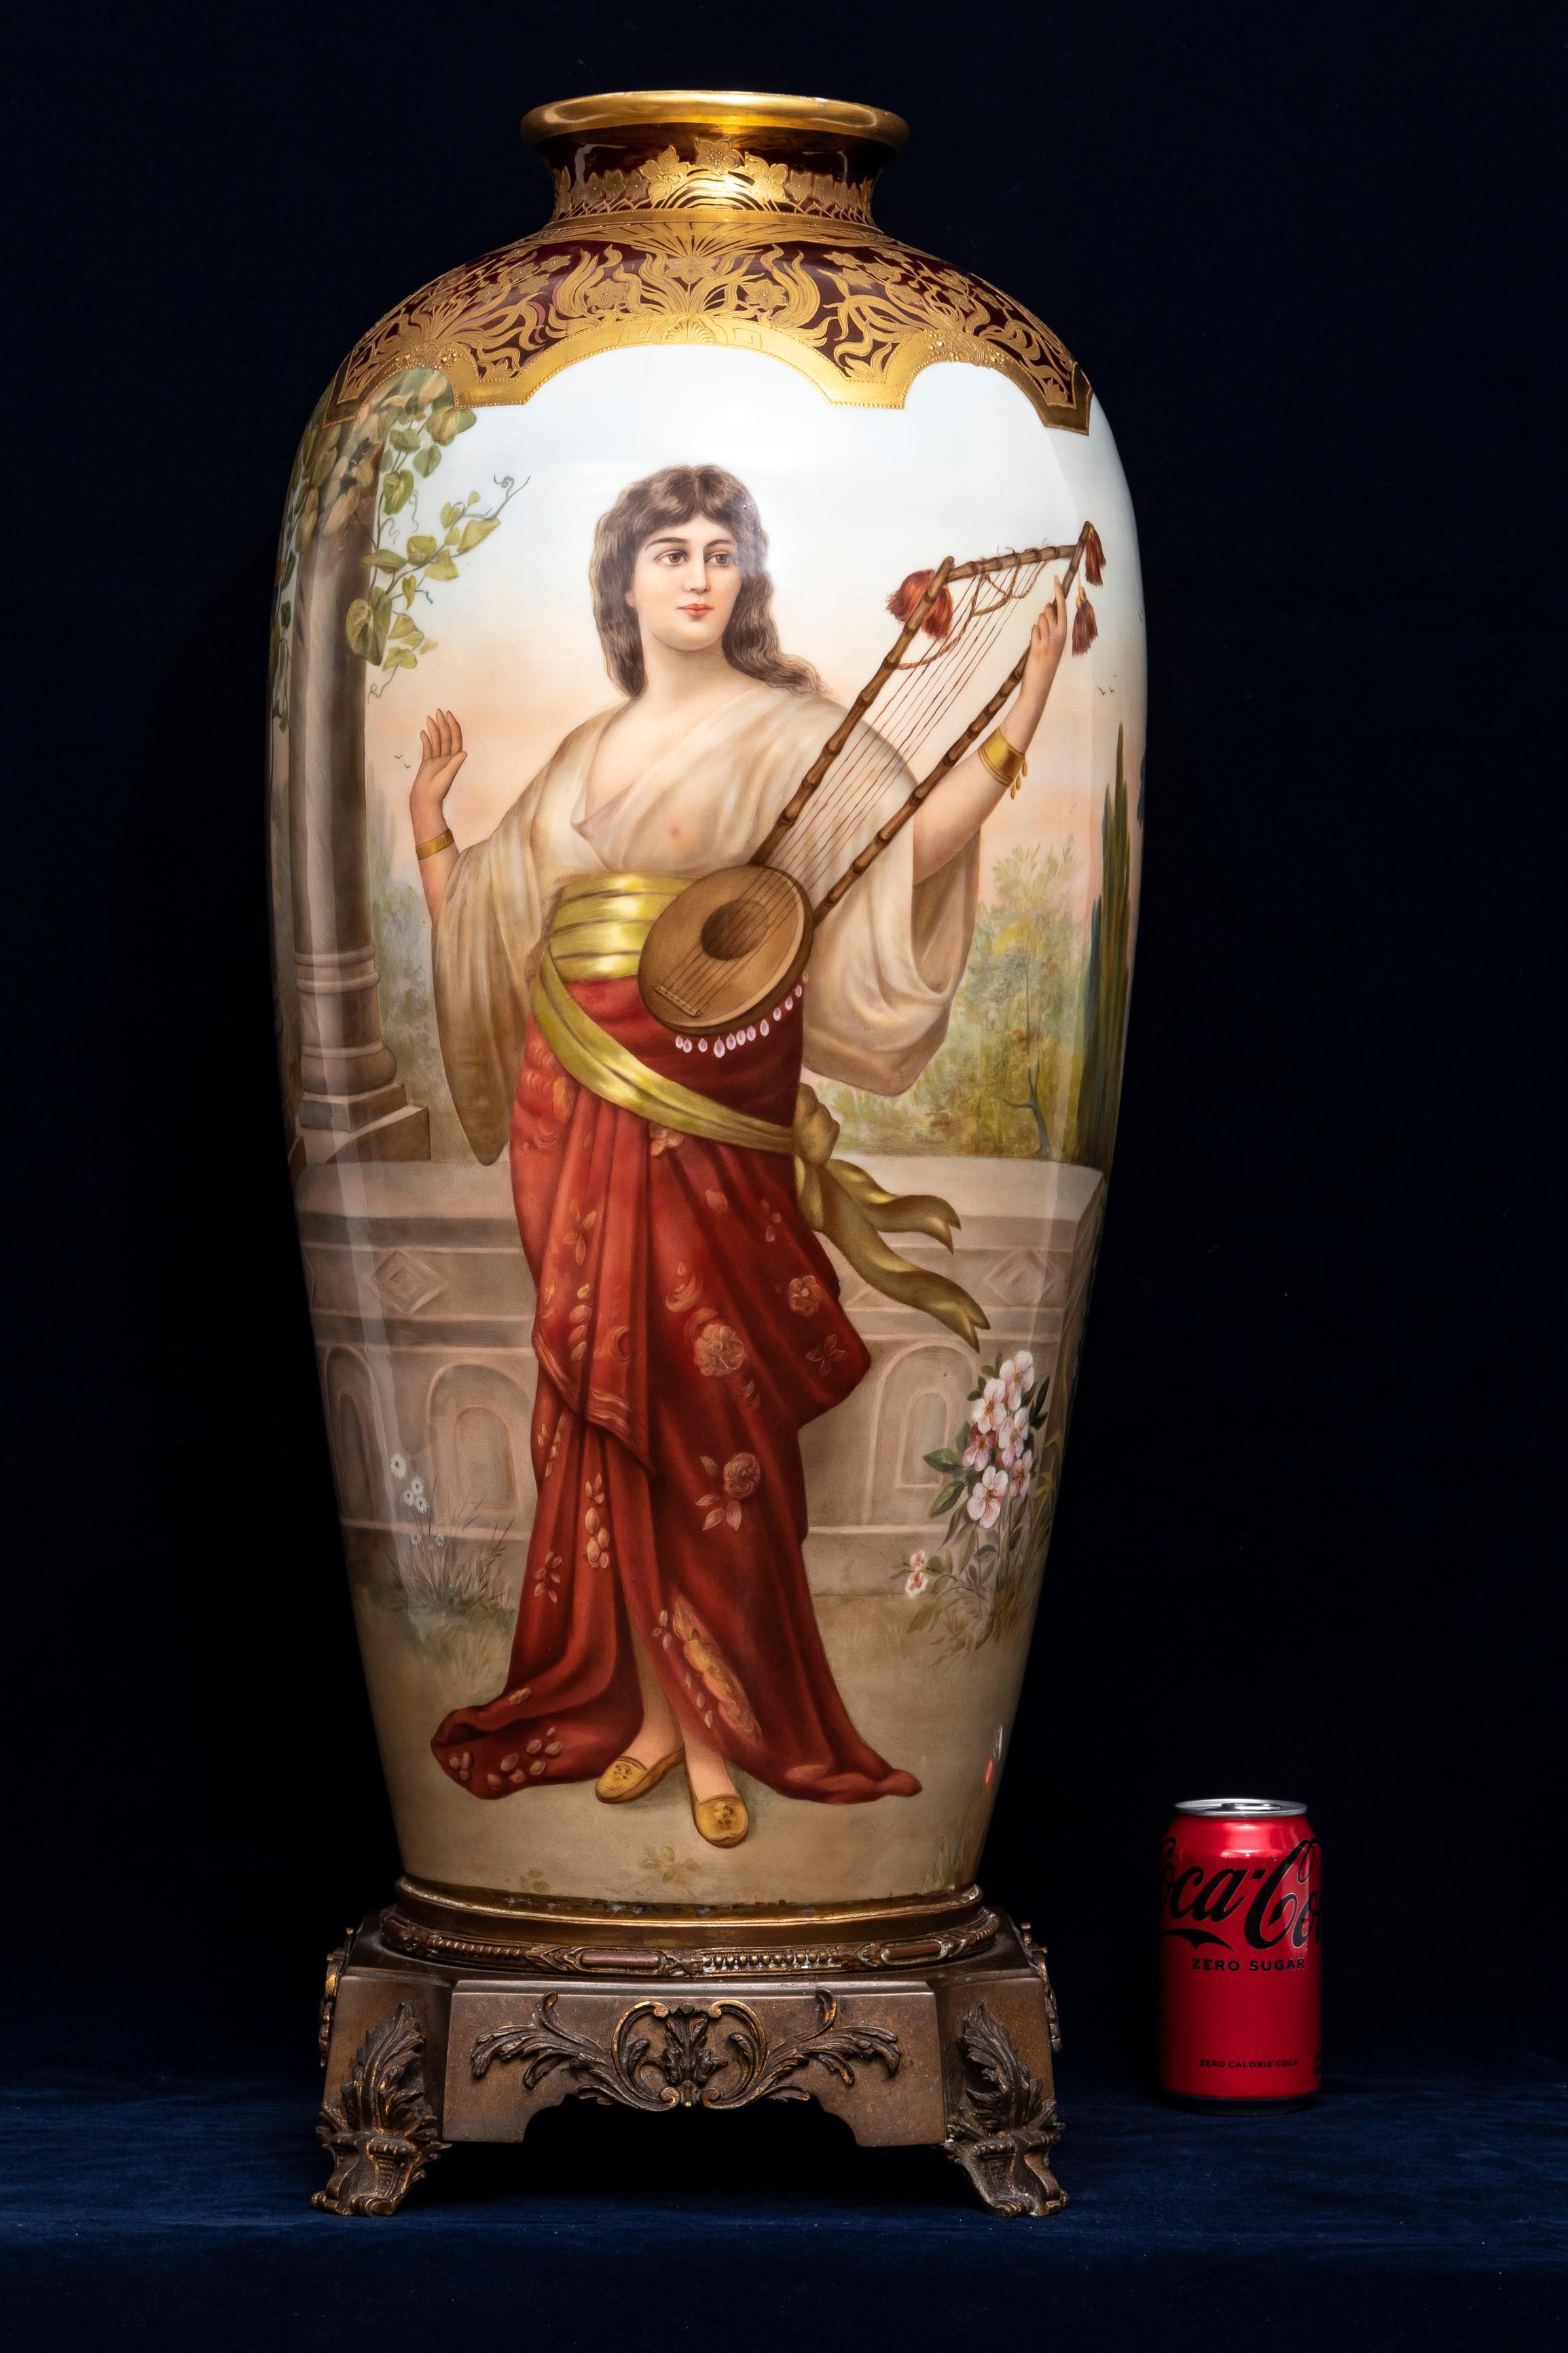 A Monumental and Beautifully Enameled 360 Degree Decorated 19th Century Vienna Porcelain Vase with Ormolu Mount, Signed Wagner. The vase is decorated in 24K raised gold, with the center being a gorgeous hand-enameled beauty playing the Lyre.  A